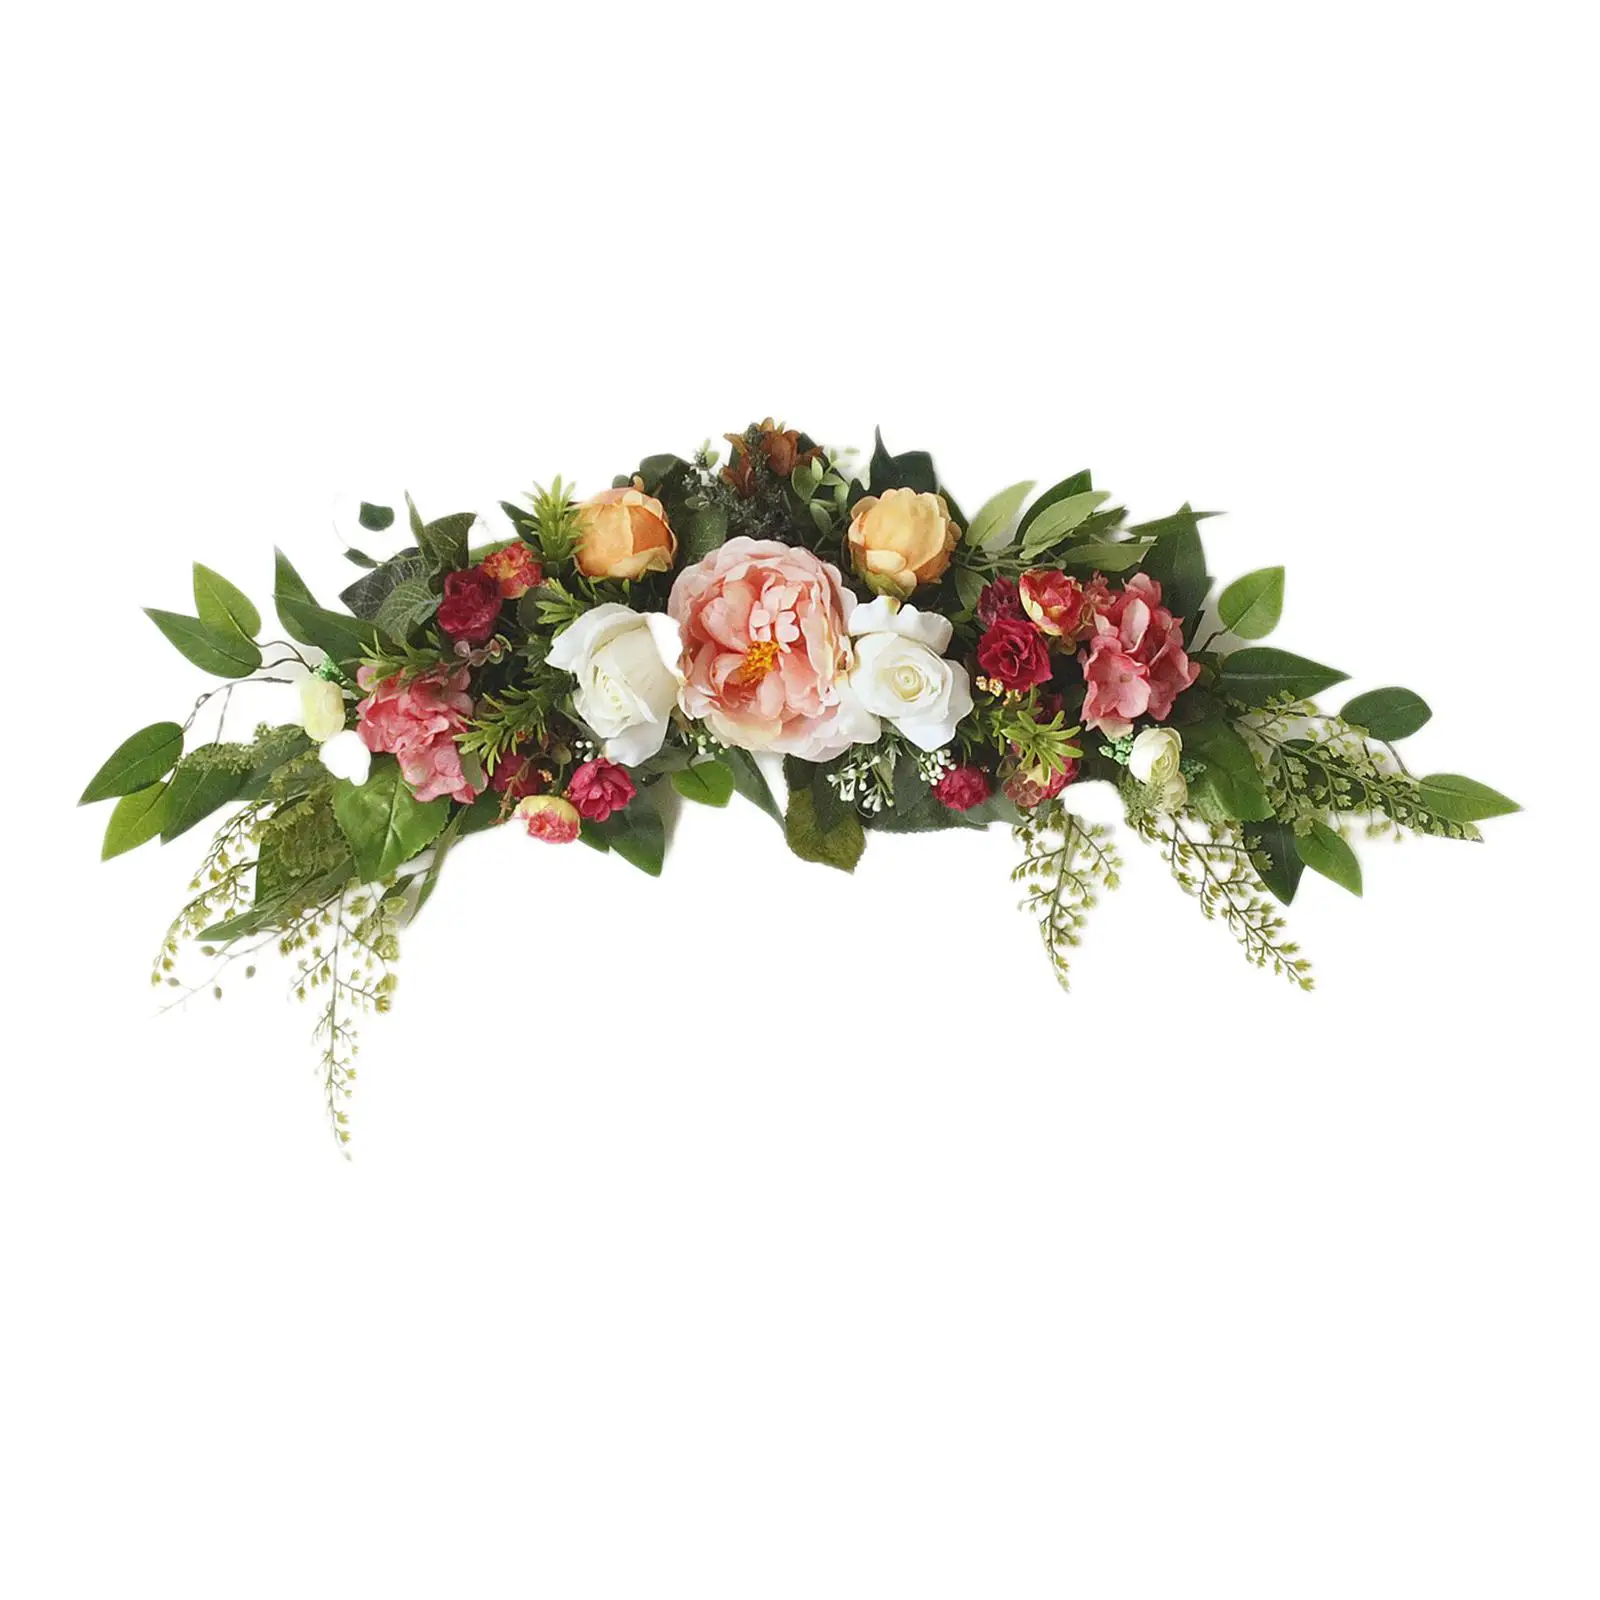  Artificial Flower Swag Greenery Plant Door Threshold Flower Wedding Arch Flowers for Backdrop Table Holiday Party Decoration